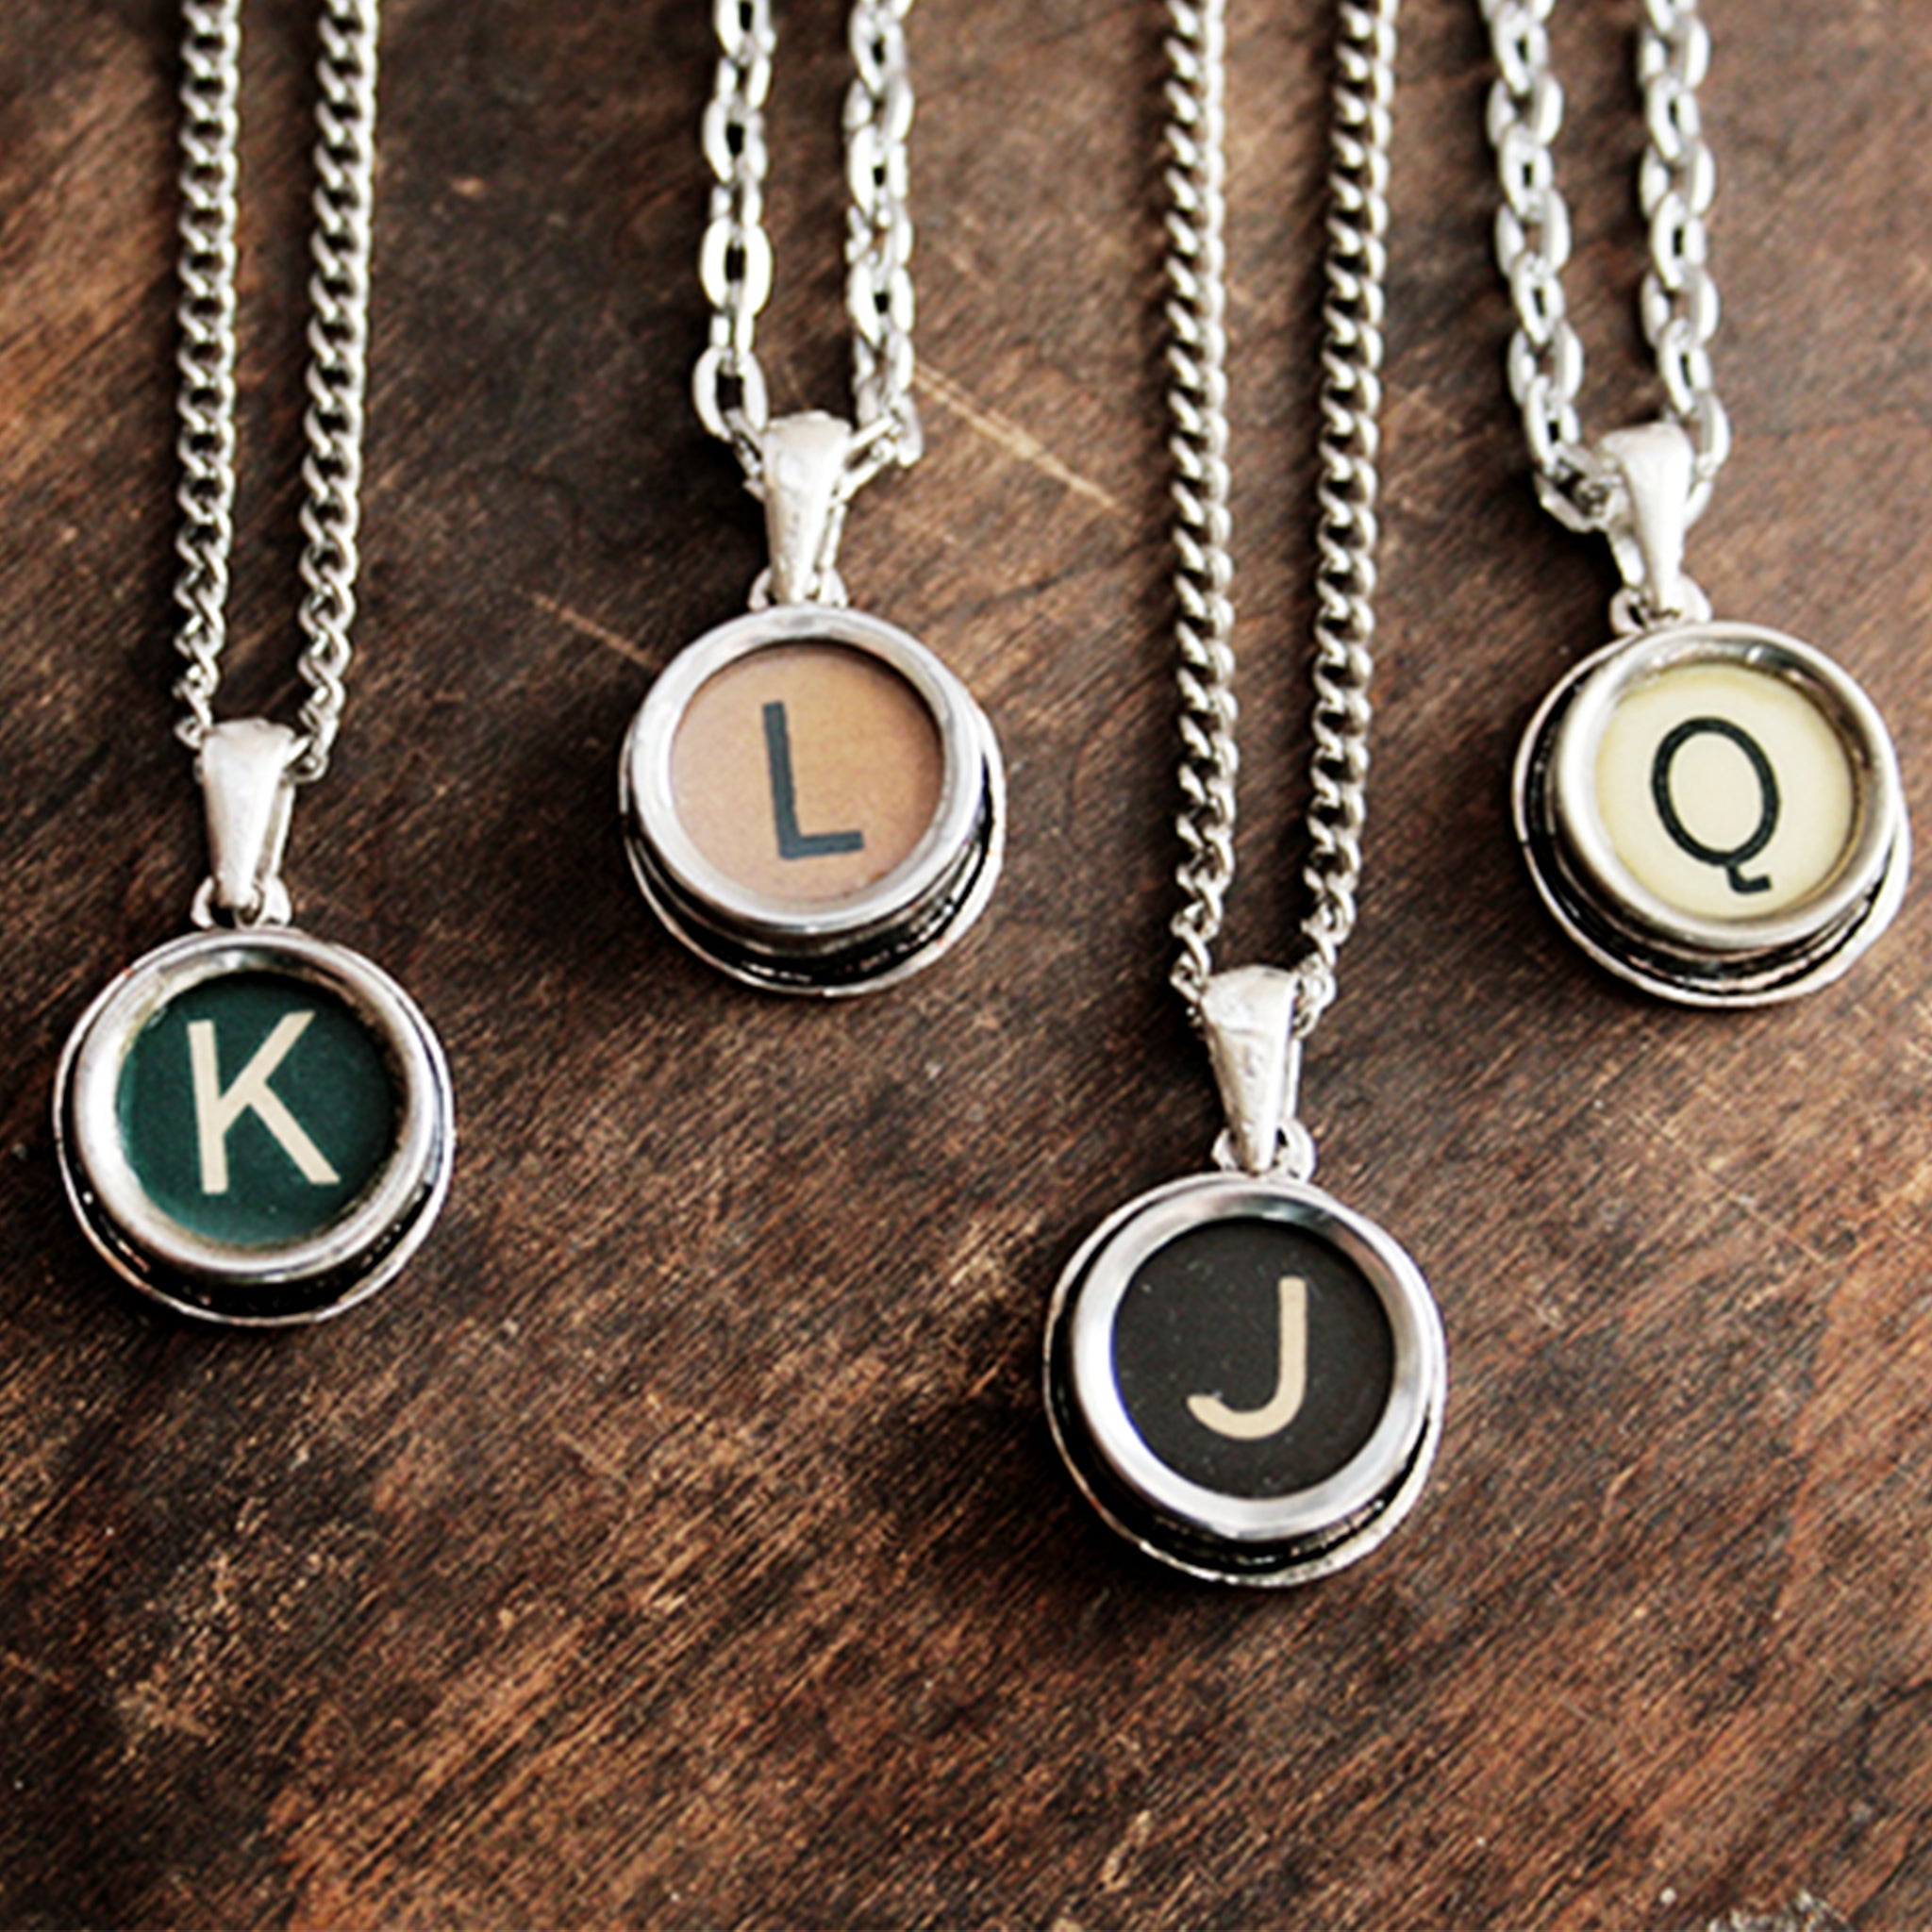 Four typewriter necklaces made of real typewriter keys in green, brown, black and ivory color